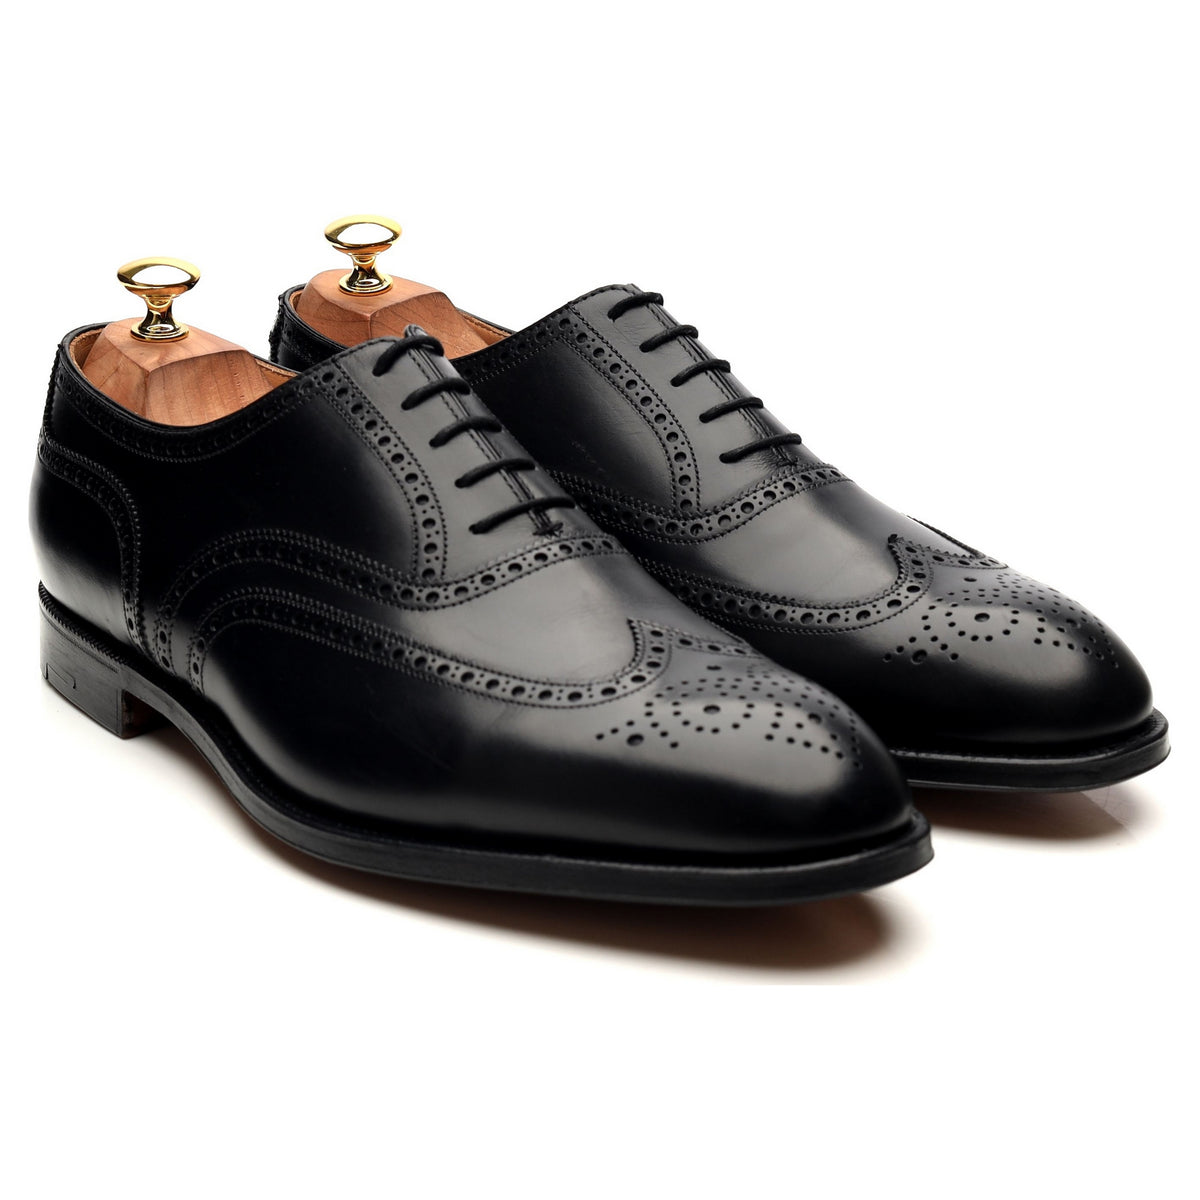 Henry Maxwell Black Leather Brogues UK 10.5 E